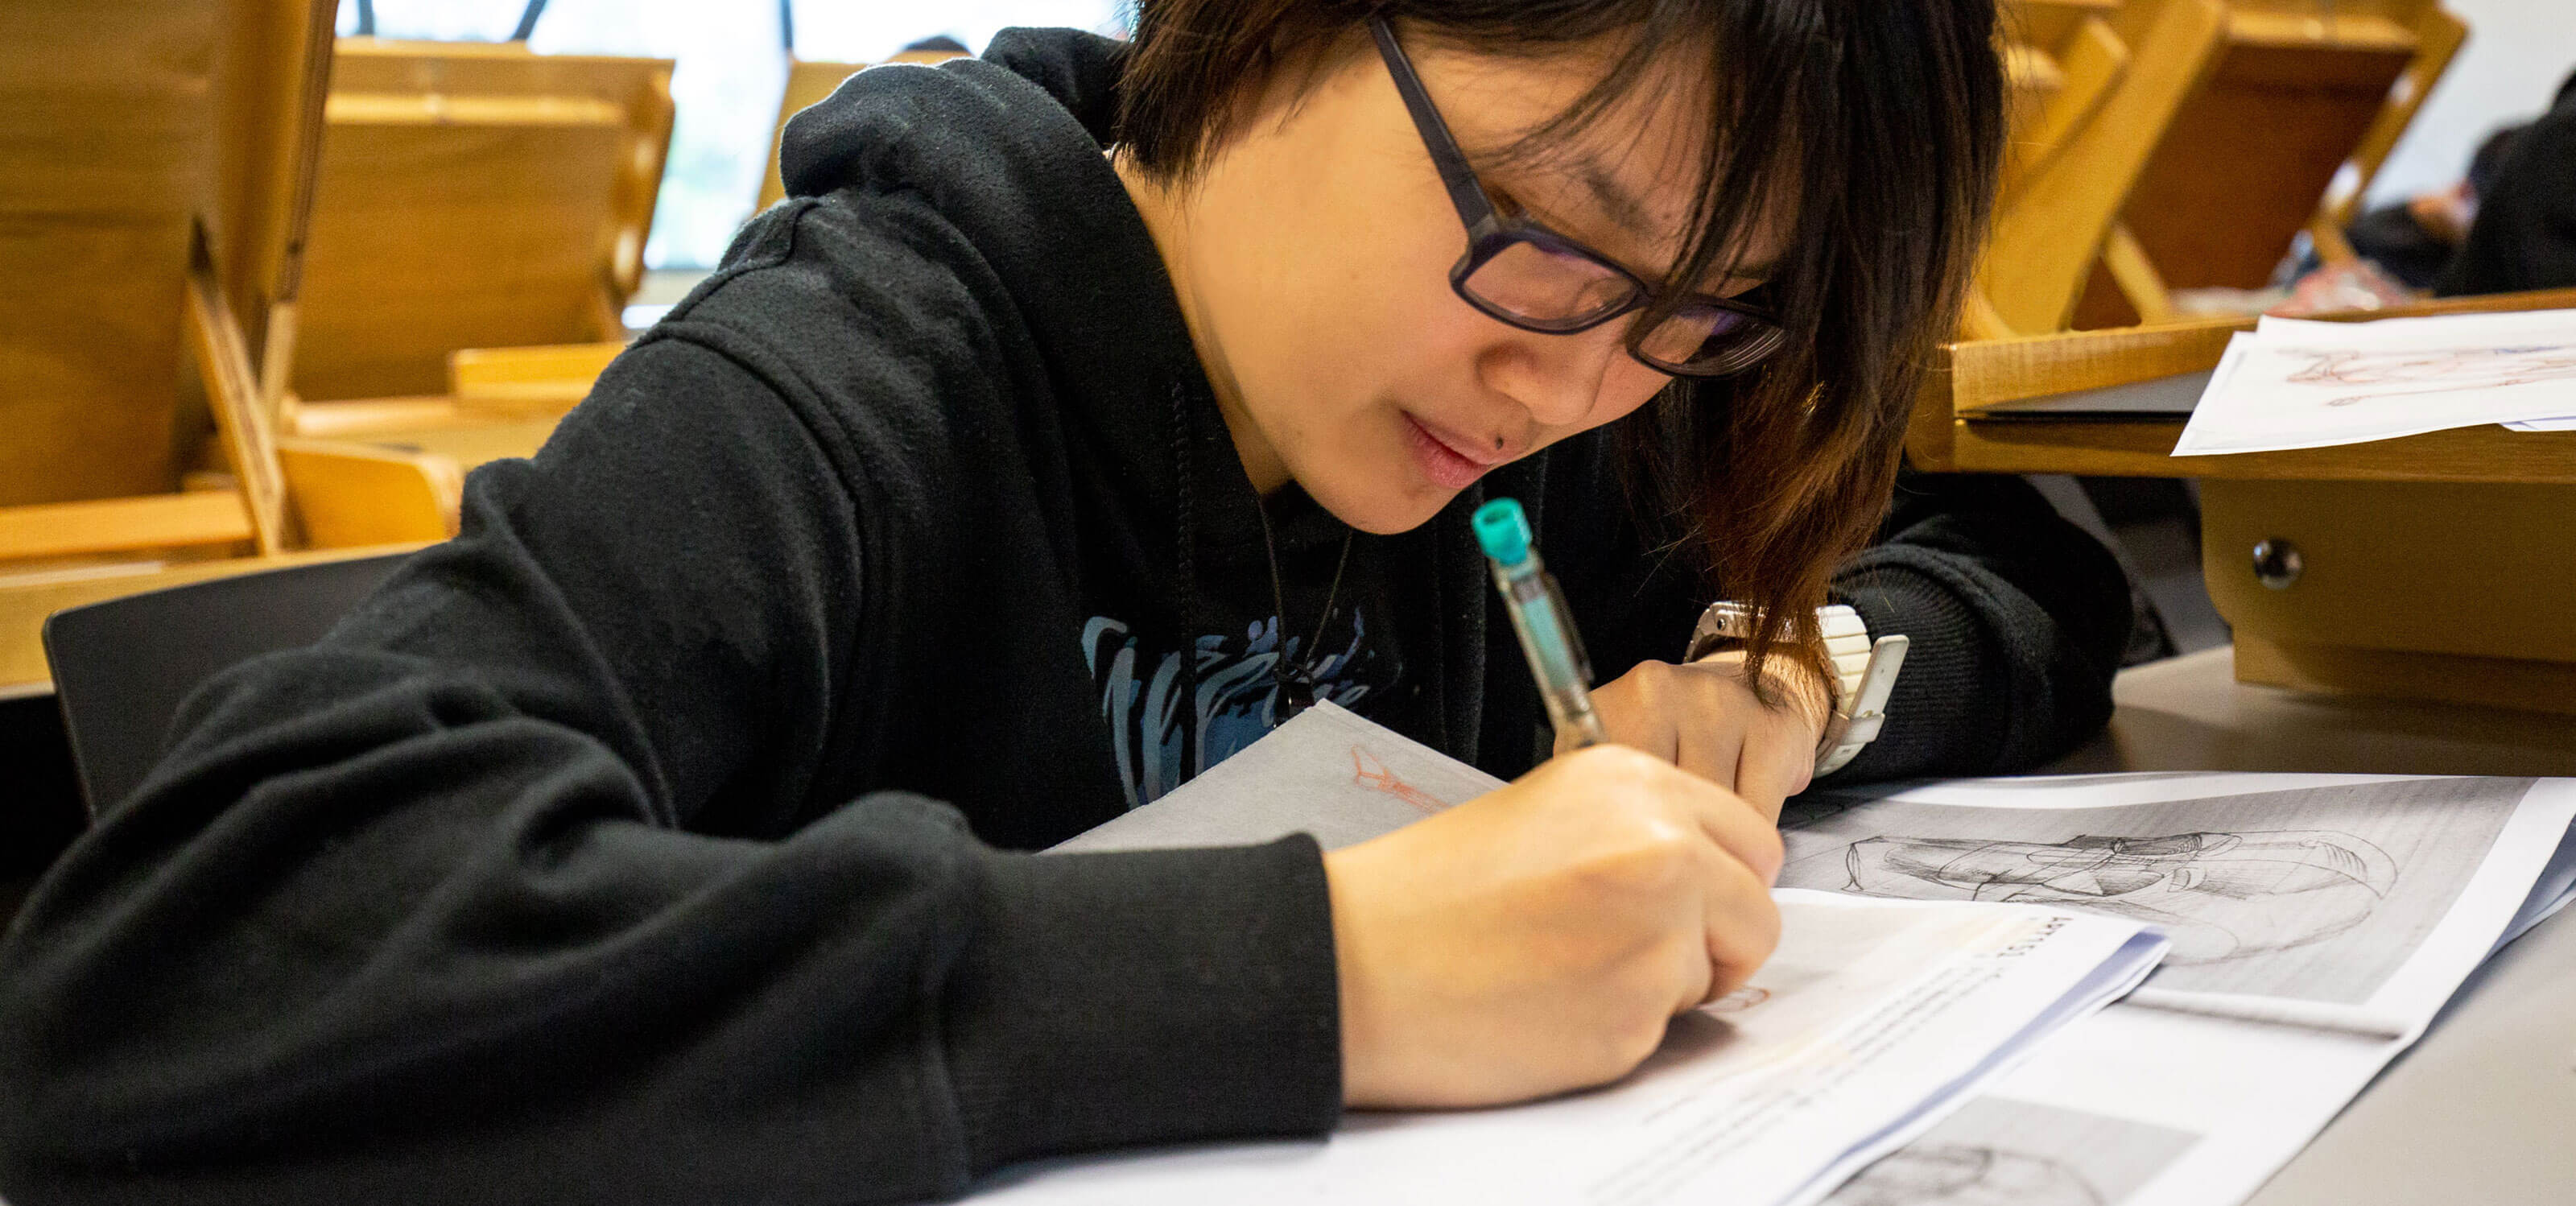 A DigiPen (Singapore) student draws with a pen on paper in a classroom